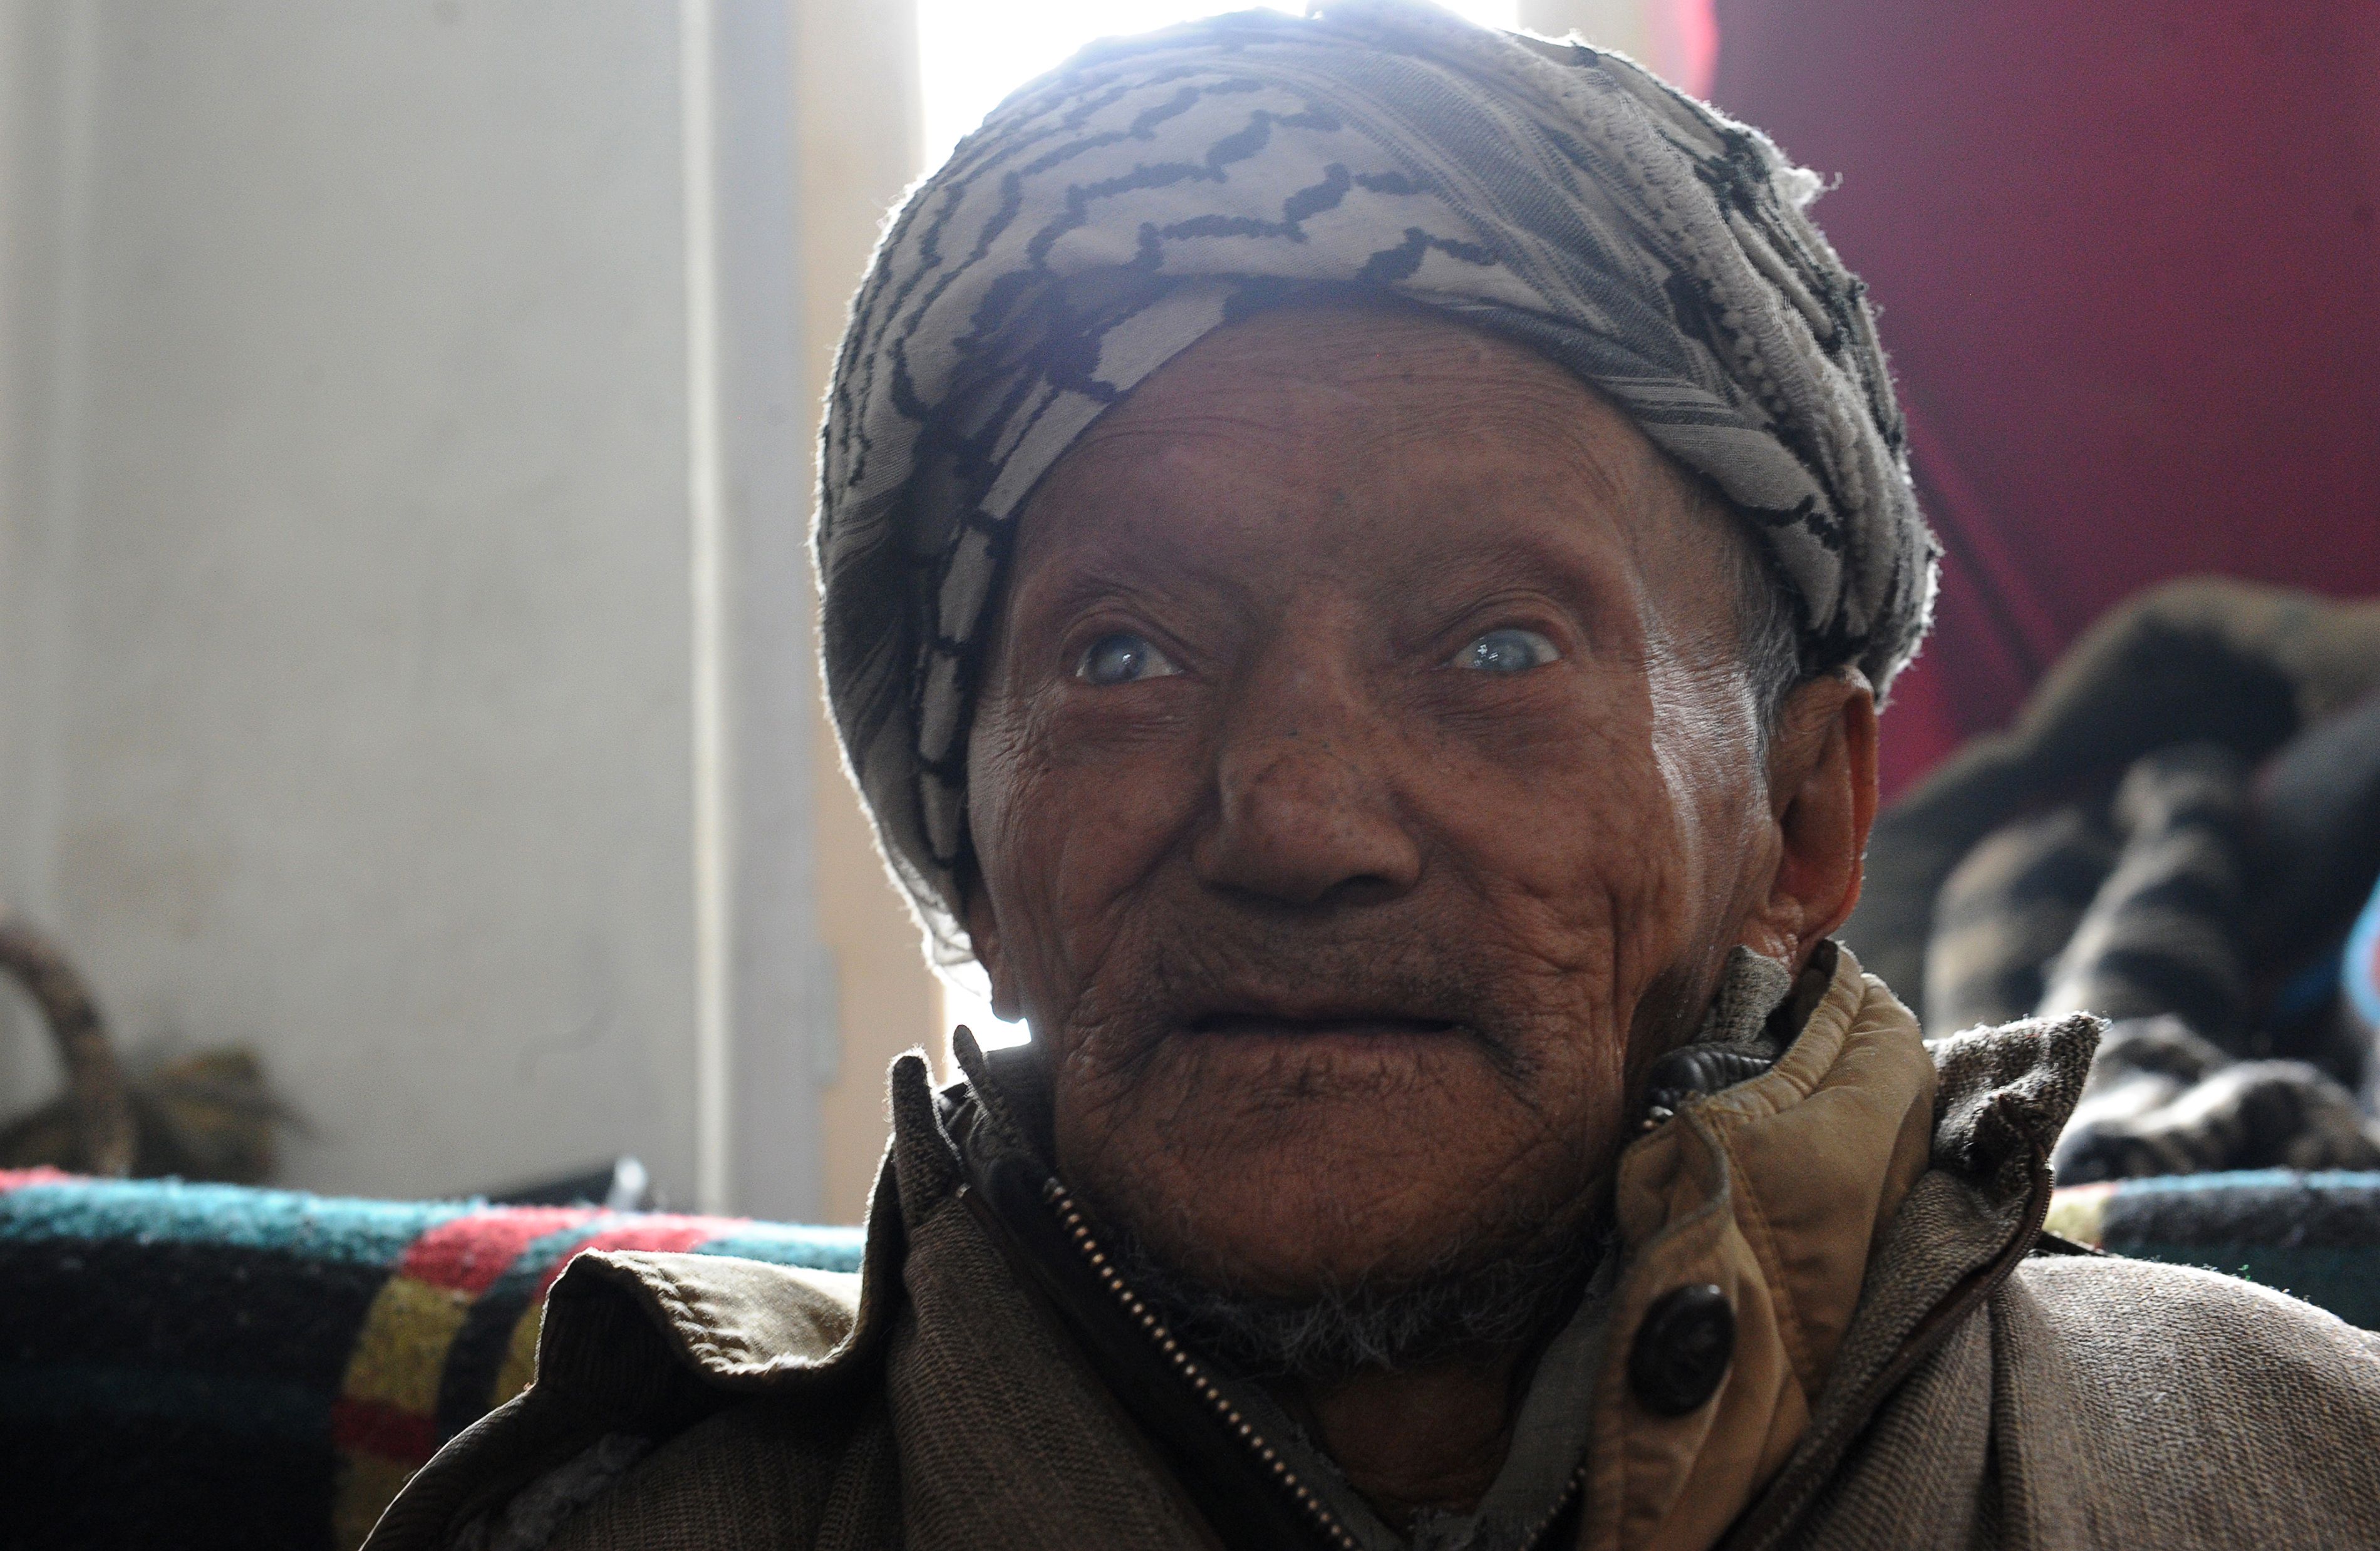 A leprosy patient sits in his room at the leprosy hospital in downtown Srinagarto.